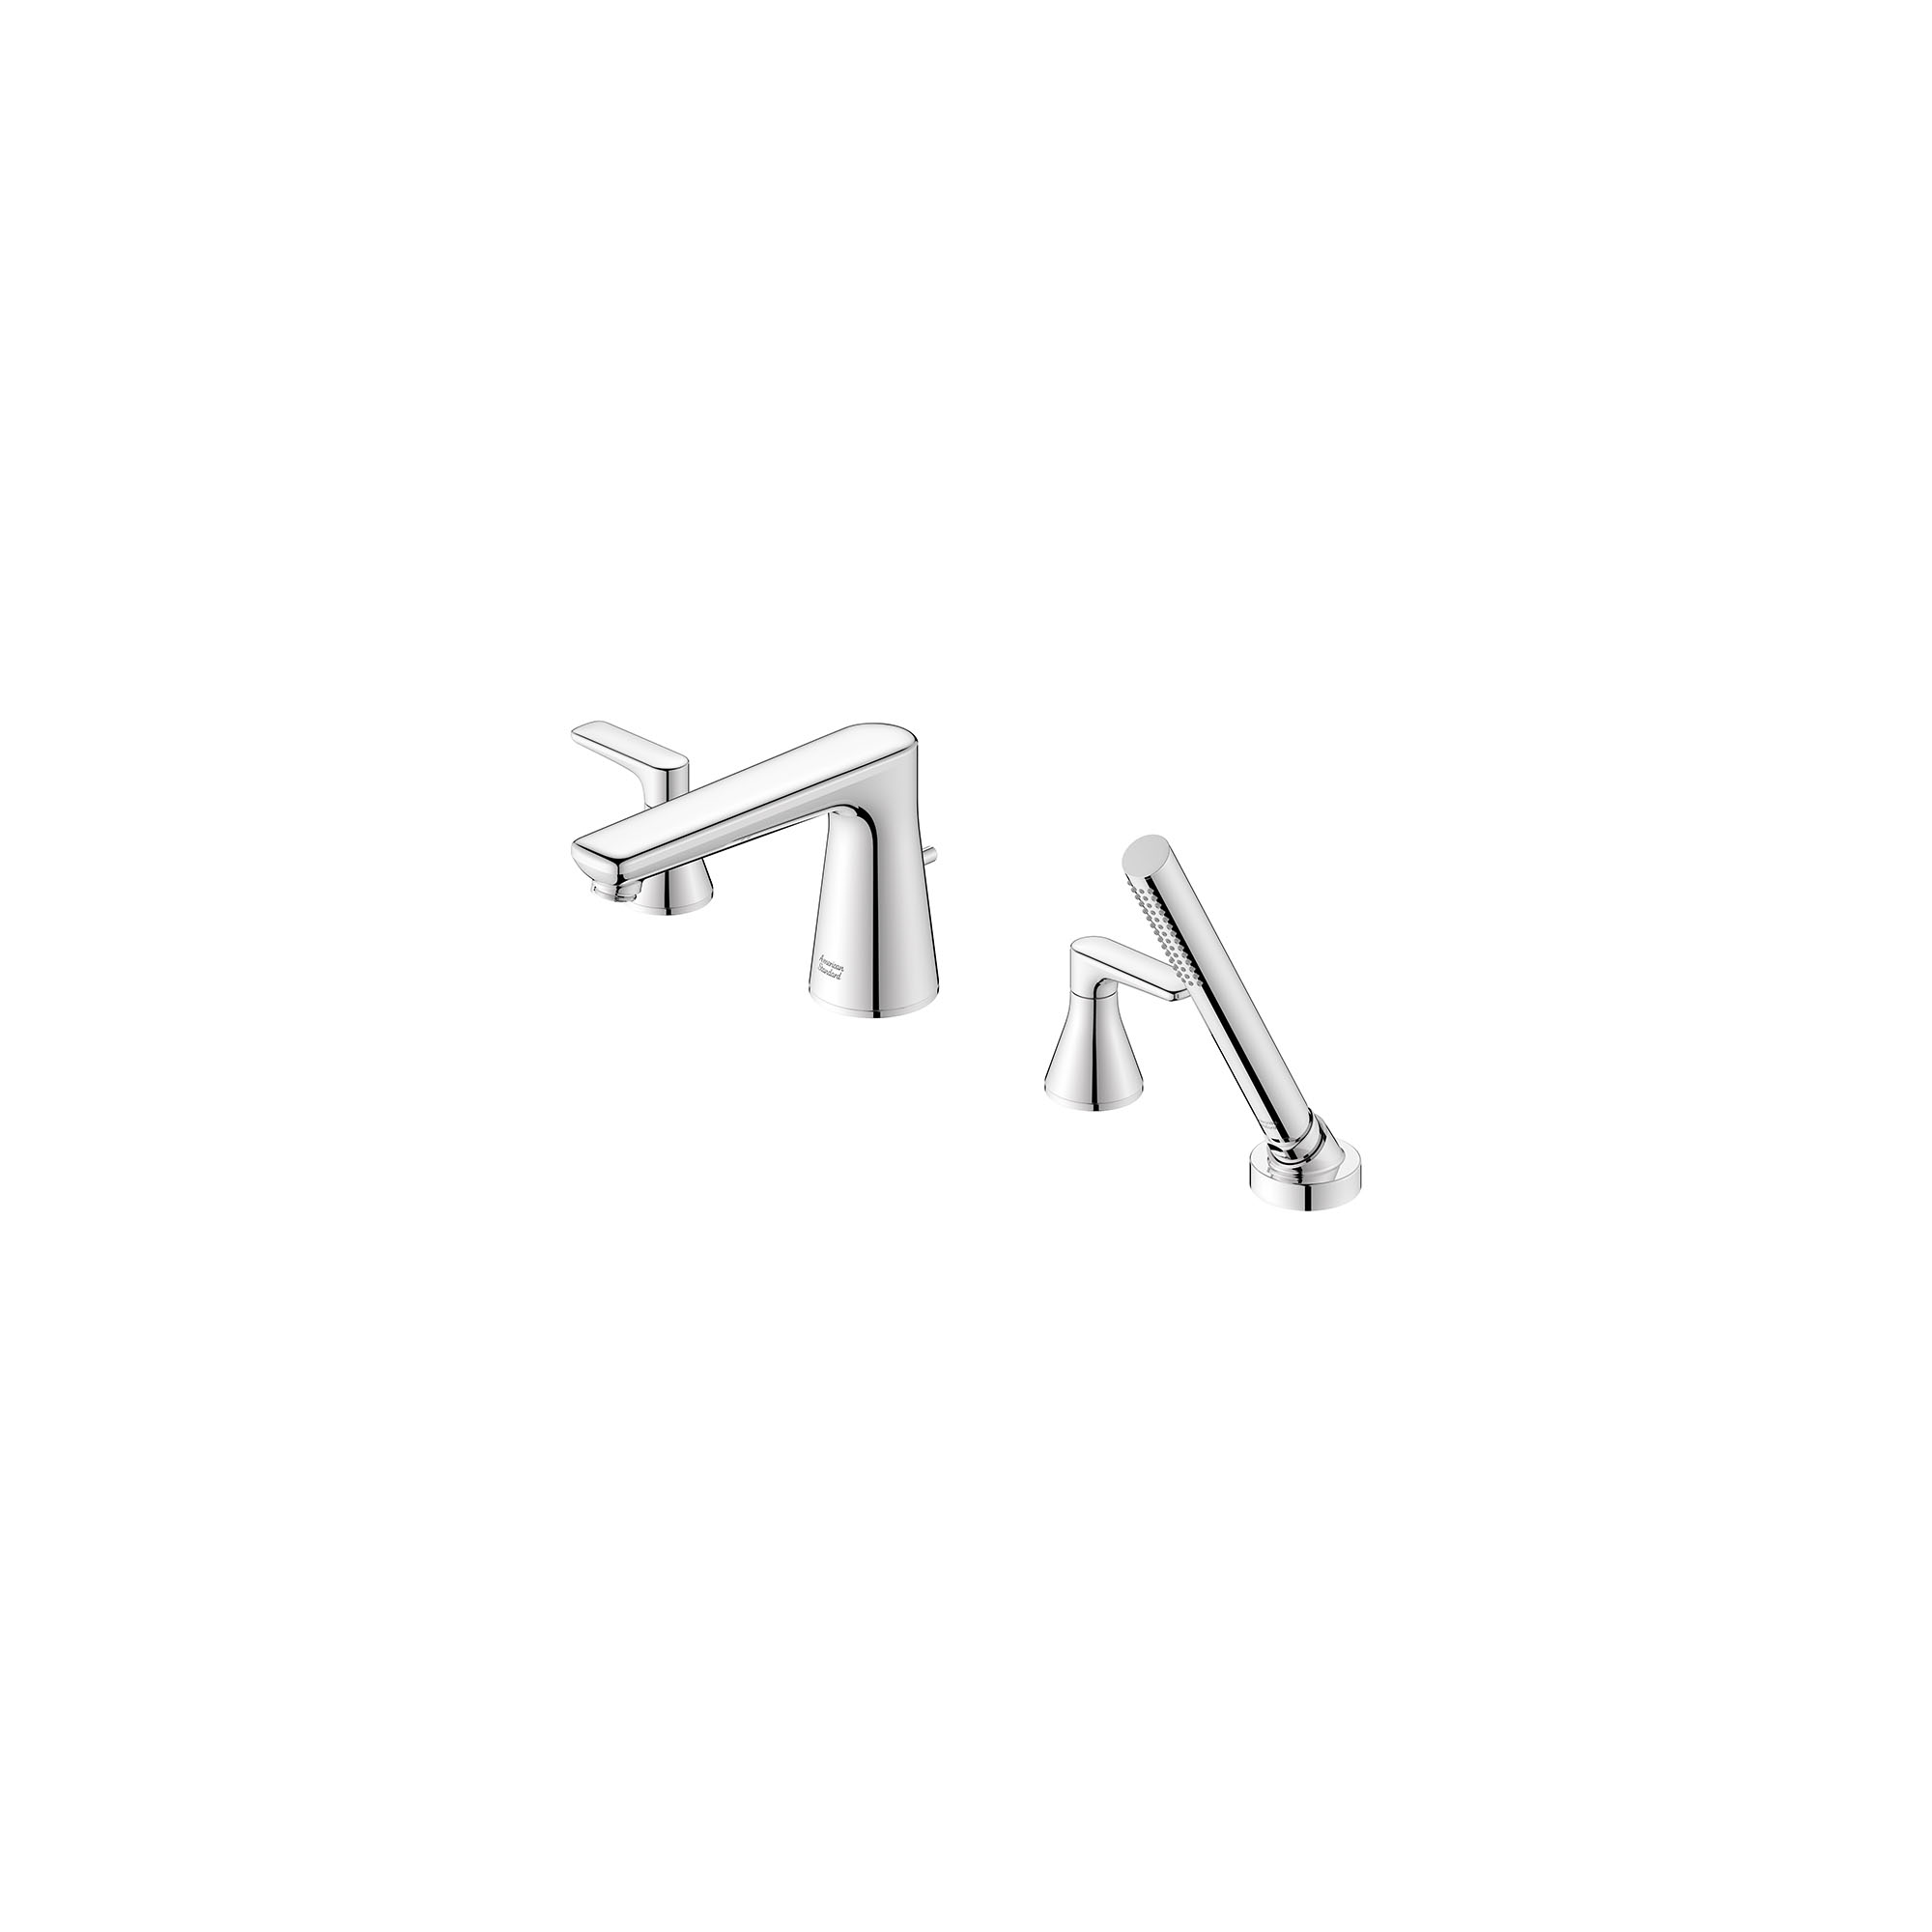 Aspirations™ 4-Hole 2-Handle Deck Mount Roman Tub Faucet  With Lever Handles and Personal Shower